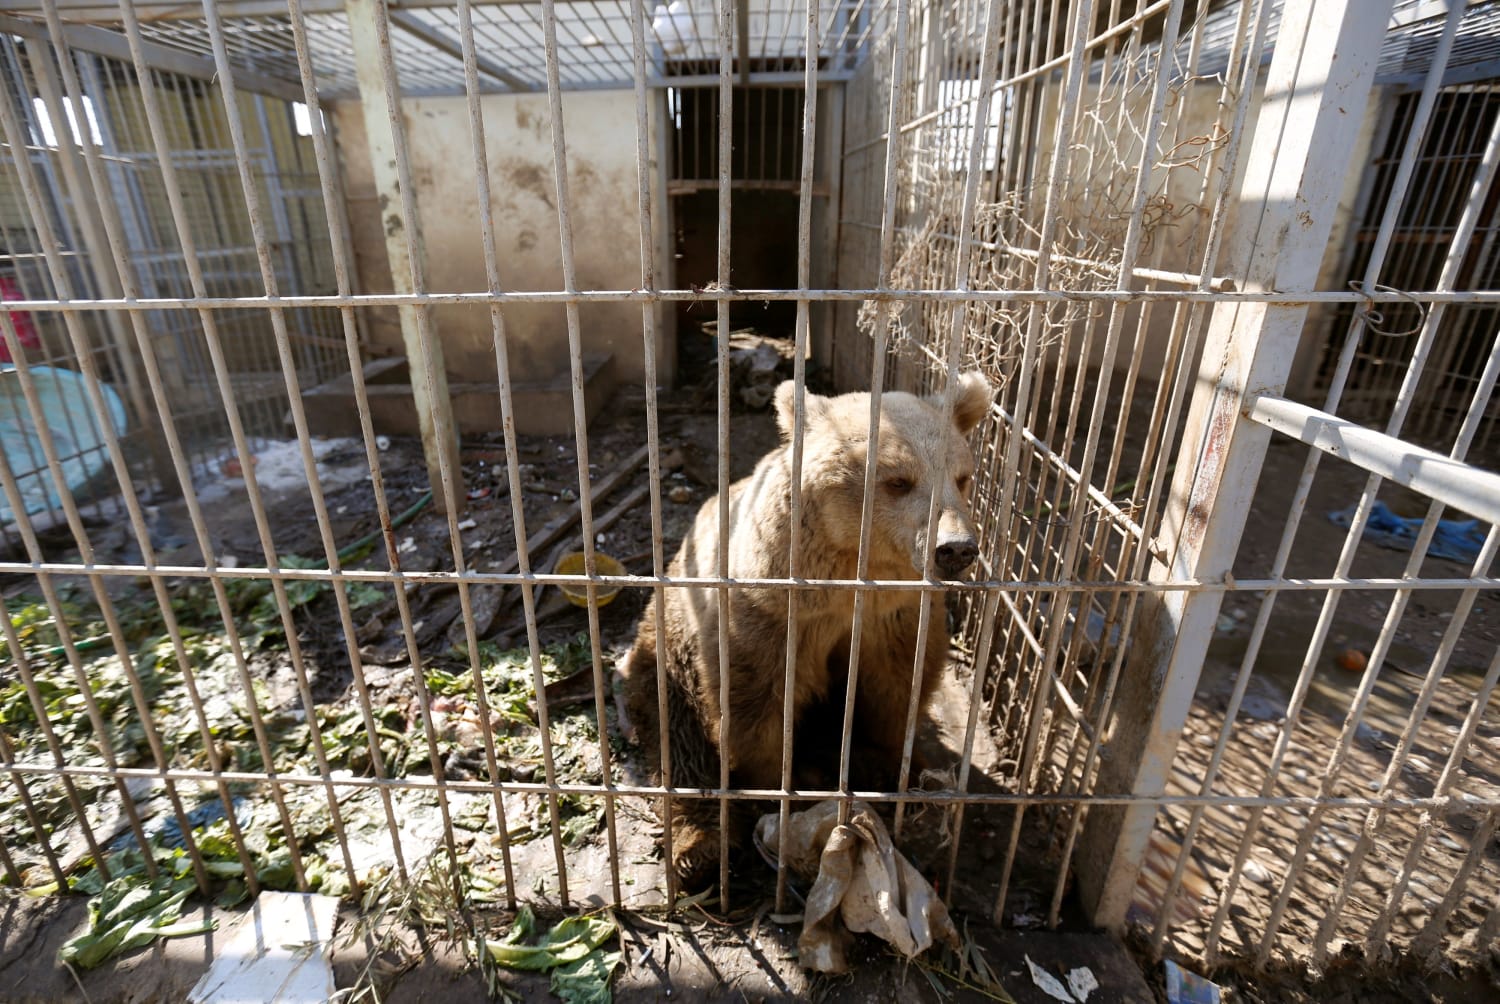 Neglected Animals Starve in Mosul Zoo